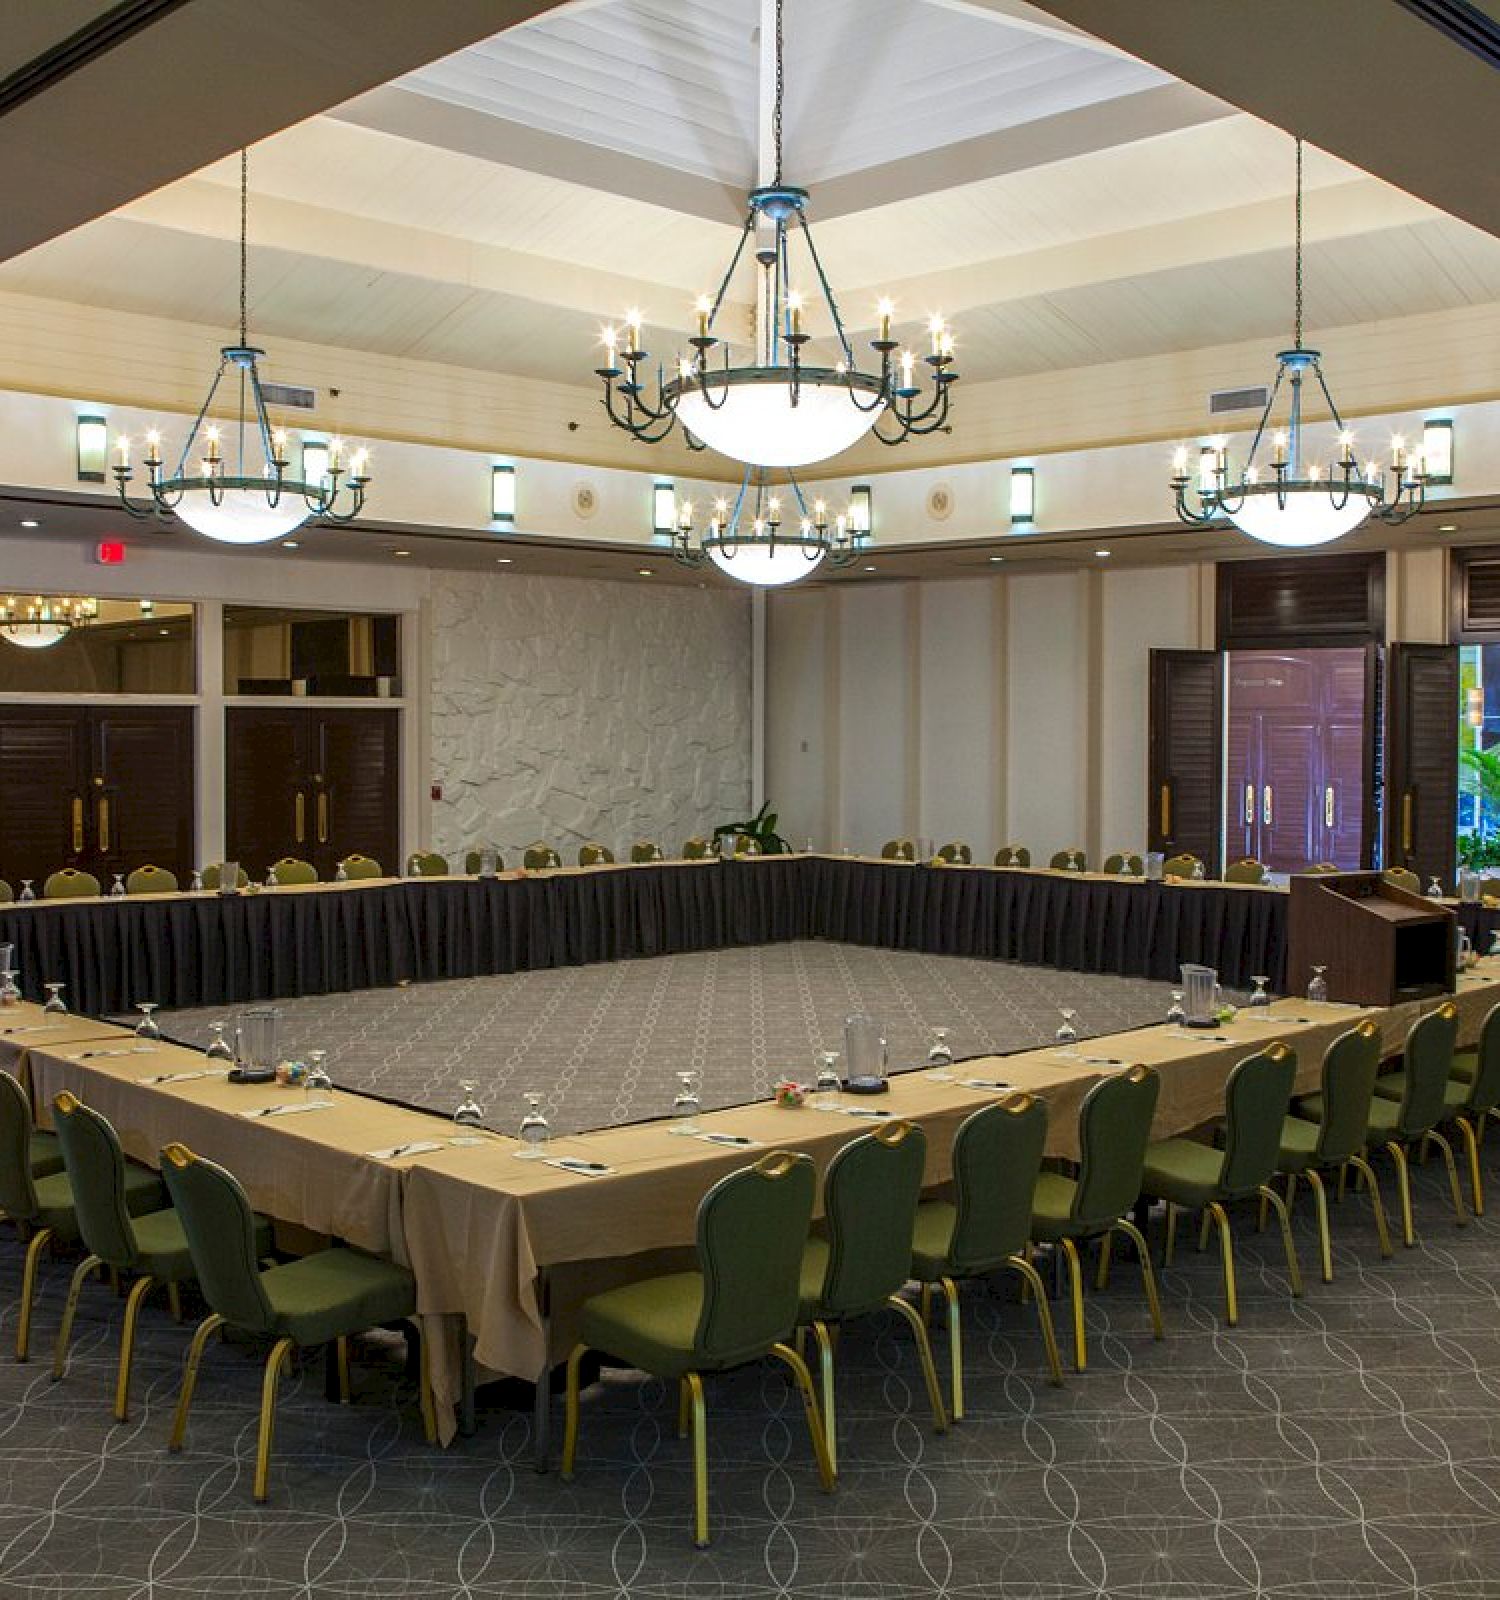 Conference room with a large U-shaped table setup, chairs, and chandeliers.